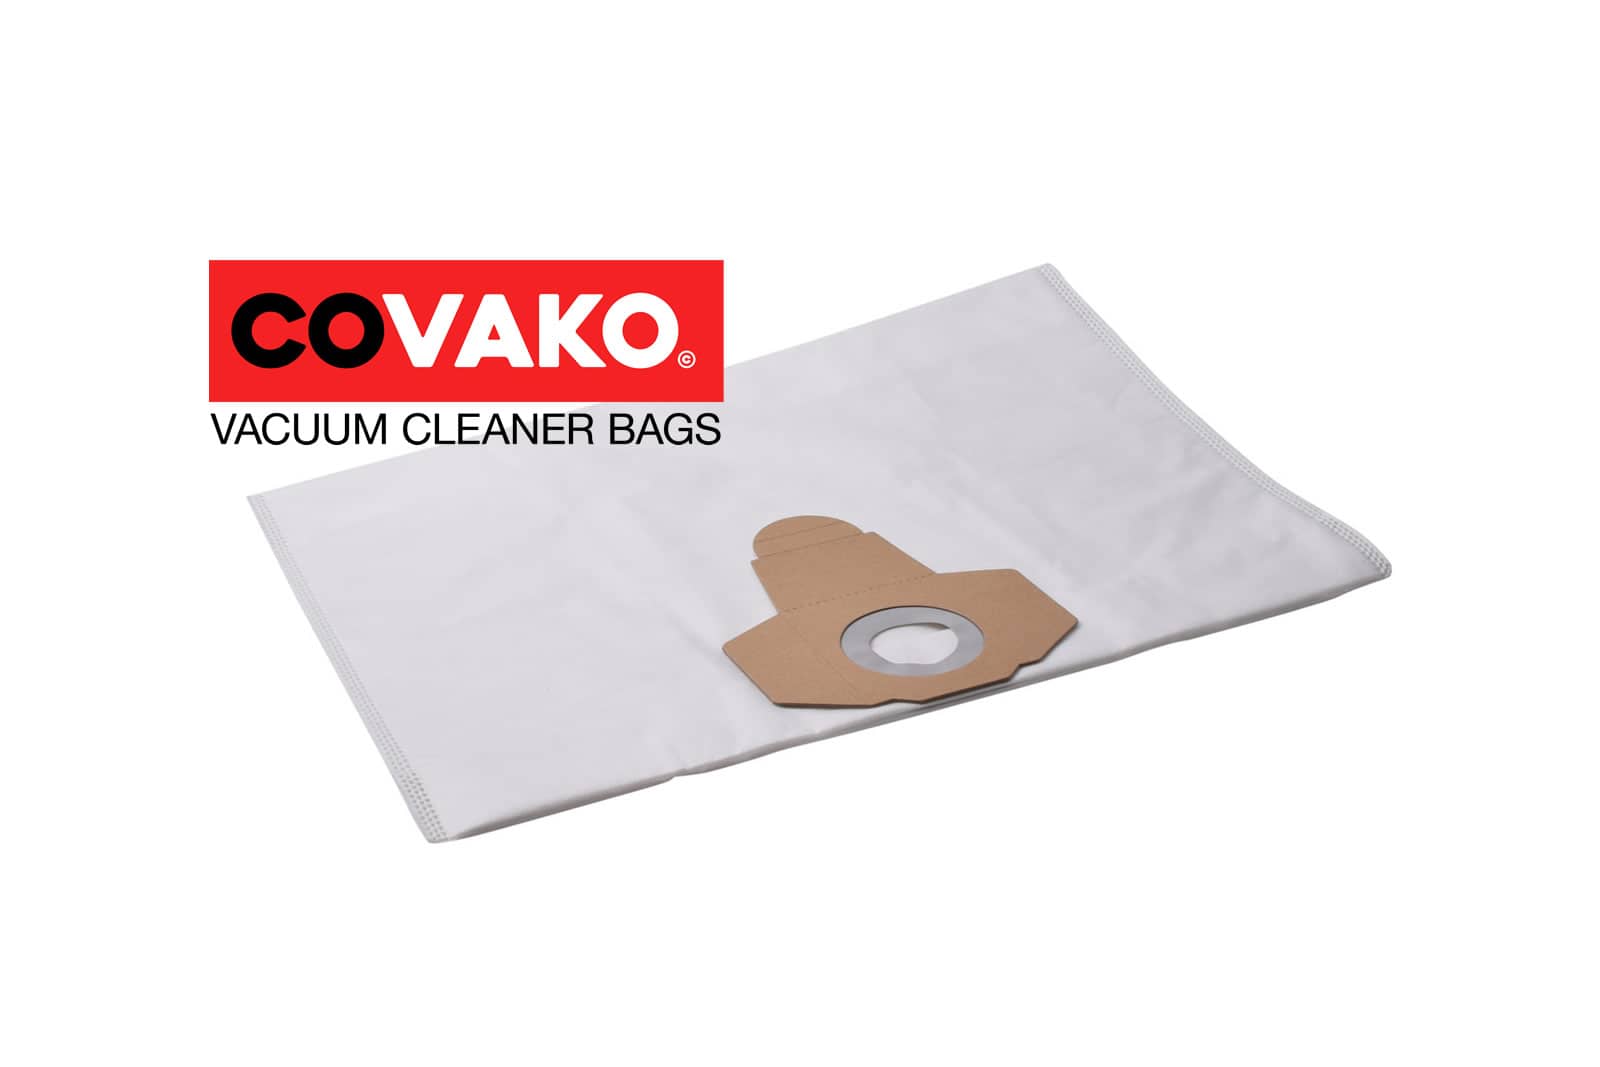 ewt Boxter 20 S / Synthesis - ewt vacuum cleaner bags